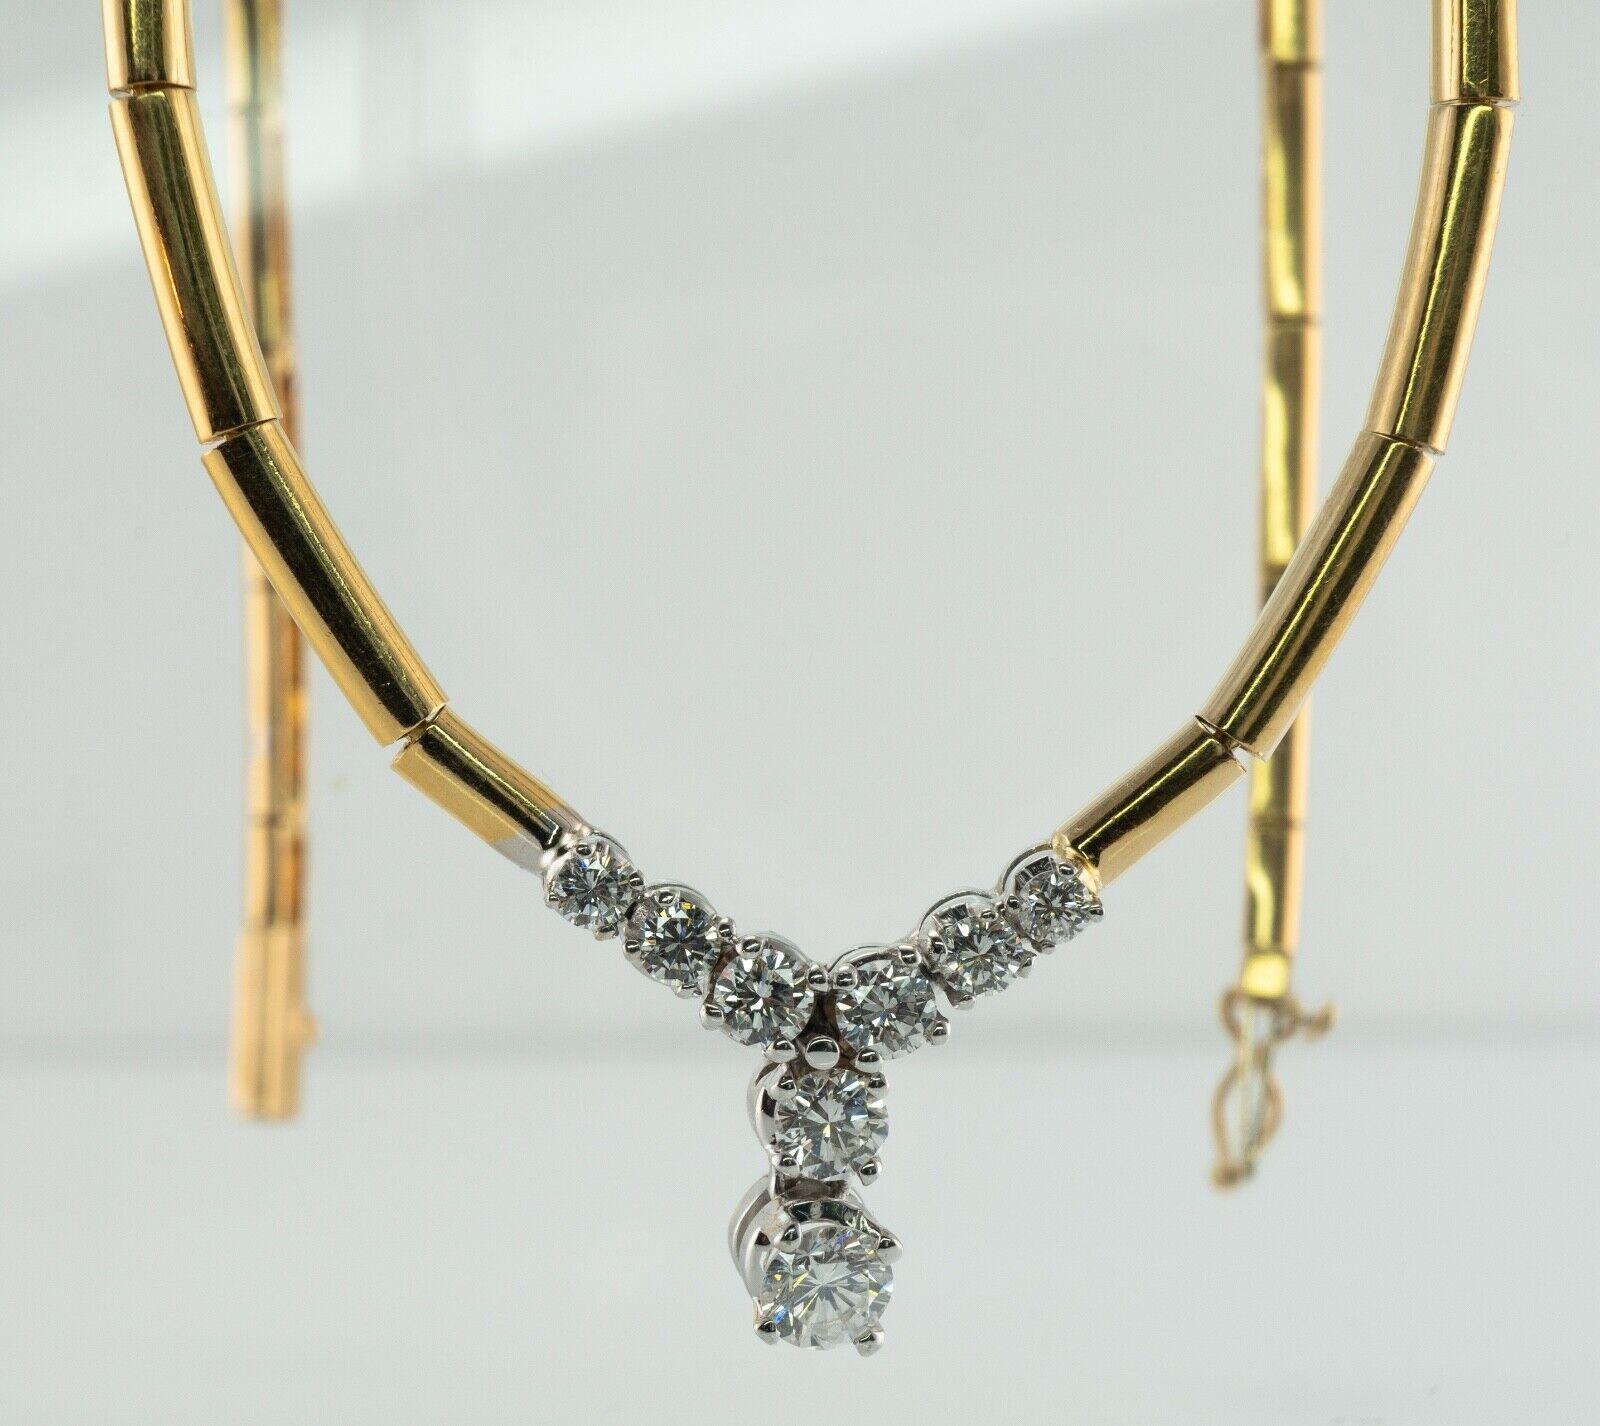 Diamond Necklace 18K Gold Choker .91 TDW V-Shape

This beautiful estate necklace is finely crafted in solid 18K Yellow Gold and set with white and fiery diamonds. 
Eight round brilliant cut diamonds total .91 carat of very clean VS1 clarity and H